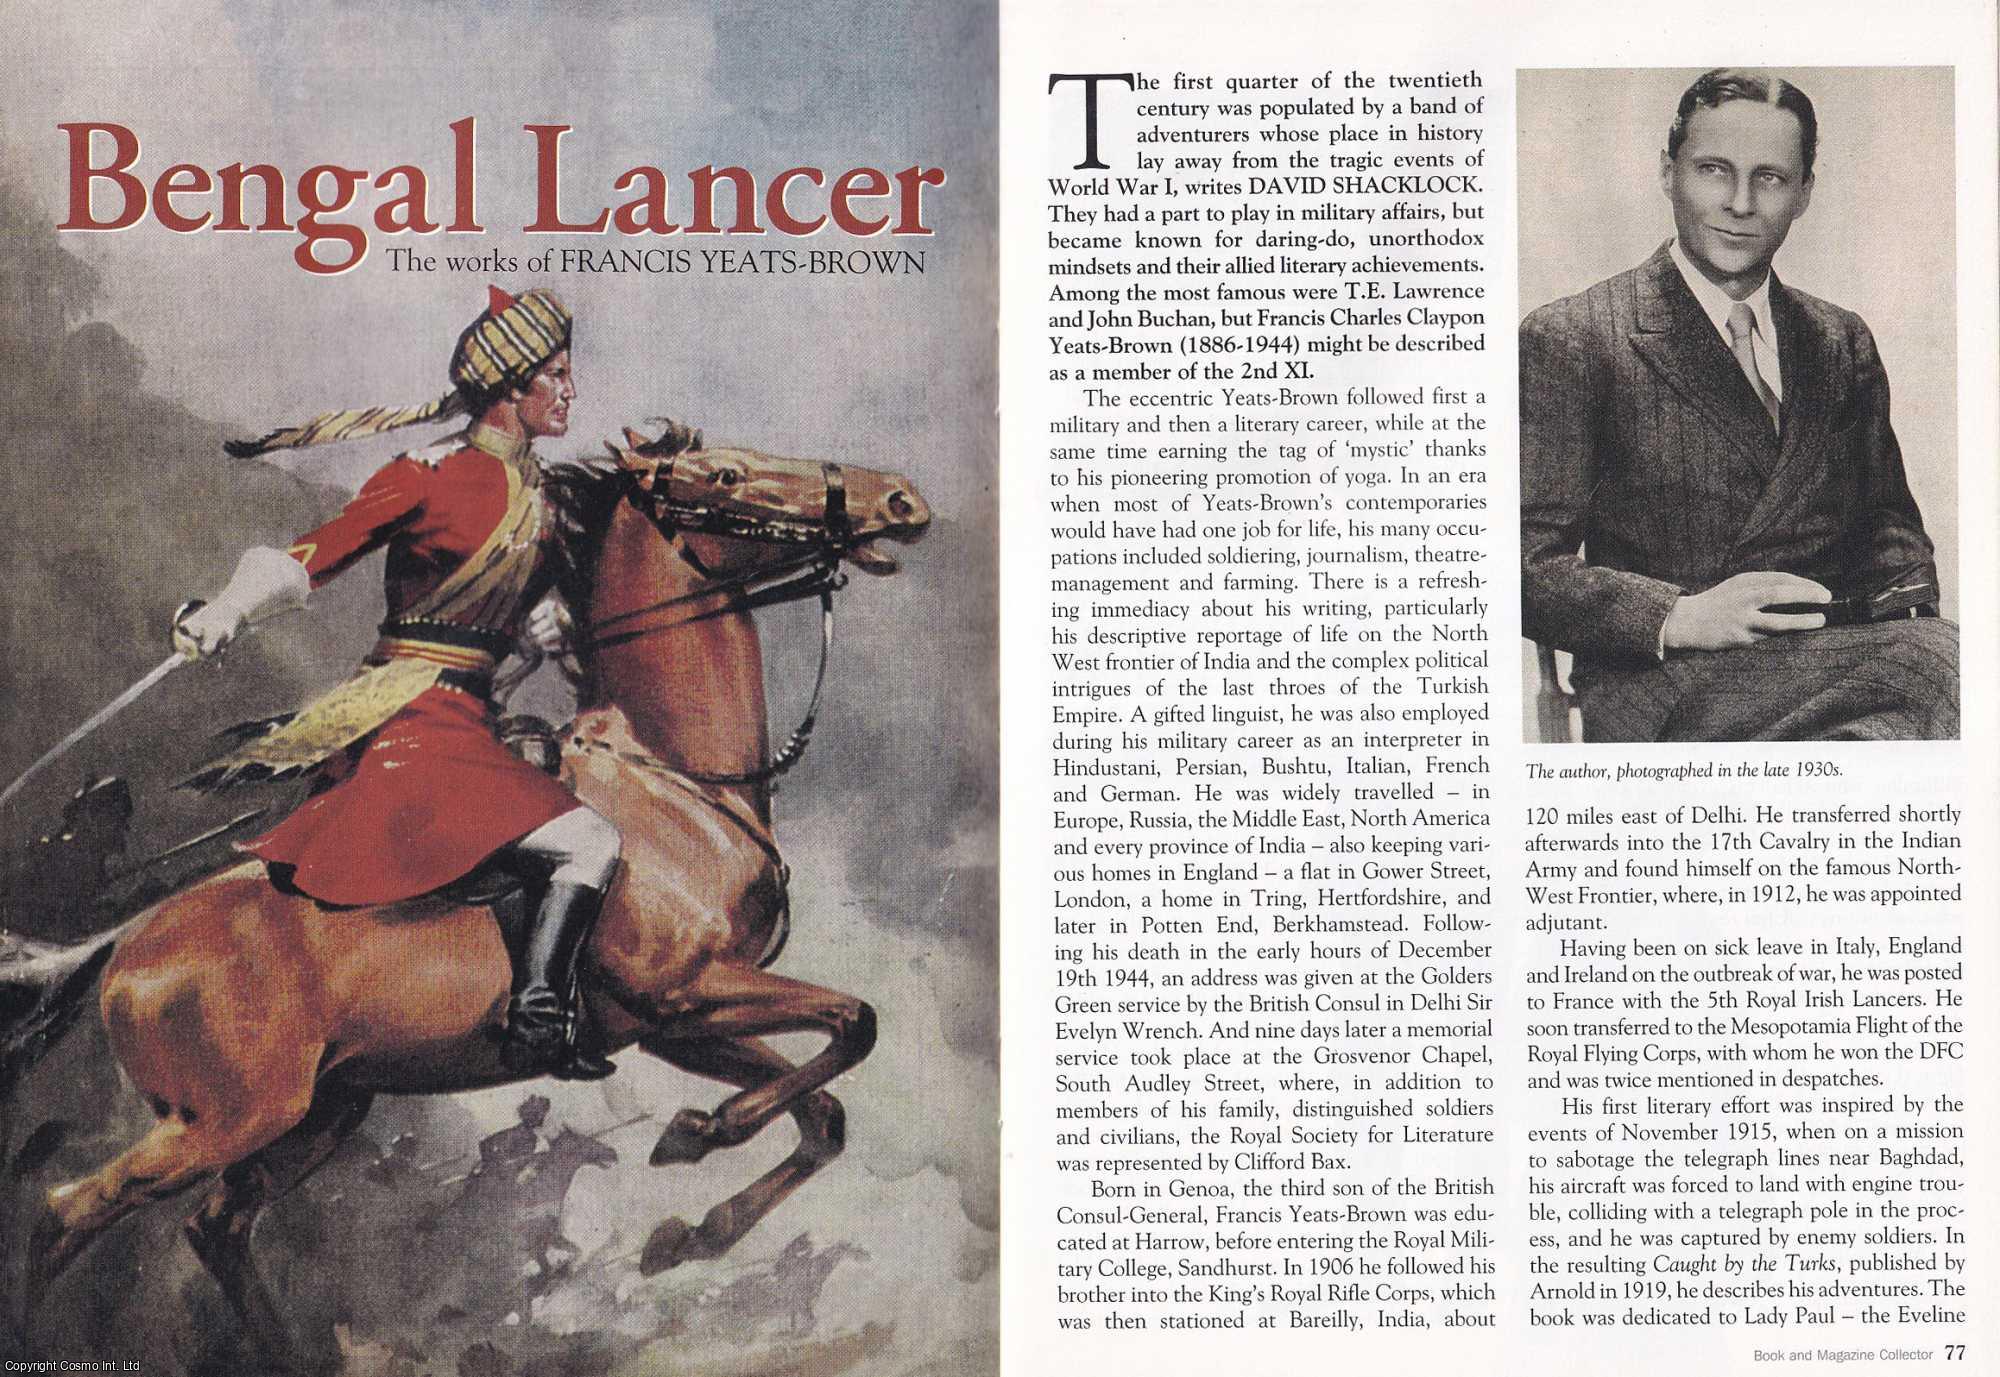 --- - Bengal Lancer. The Works of Francis Yeats-Brown. This is an original article separated from an issue of The Book & Magazine Collector publication.